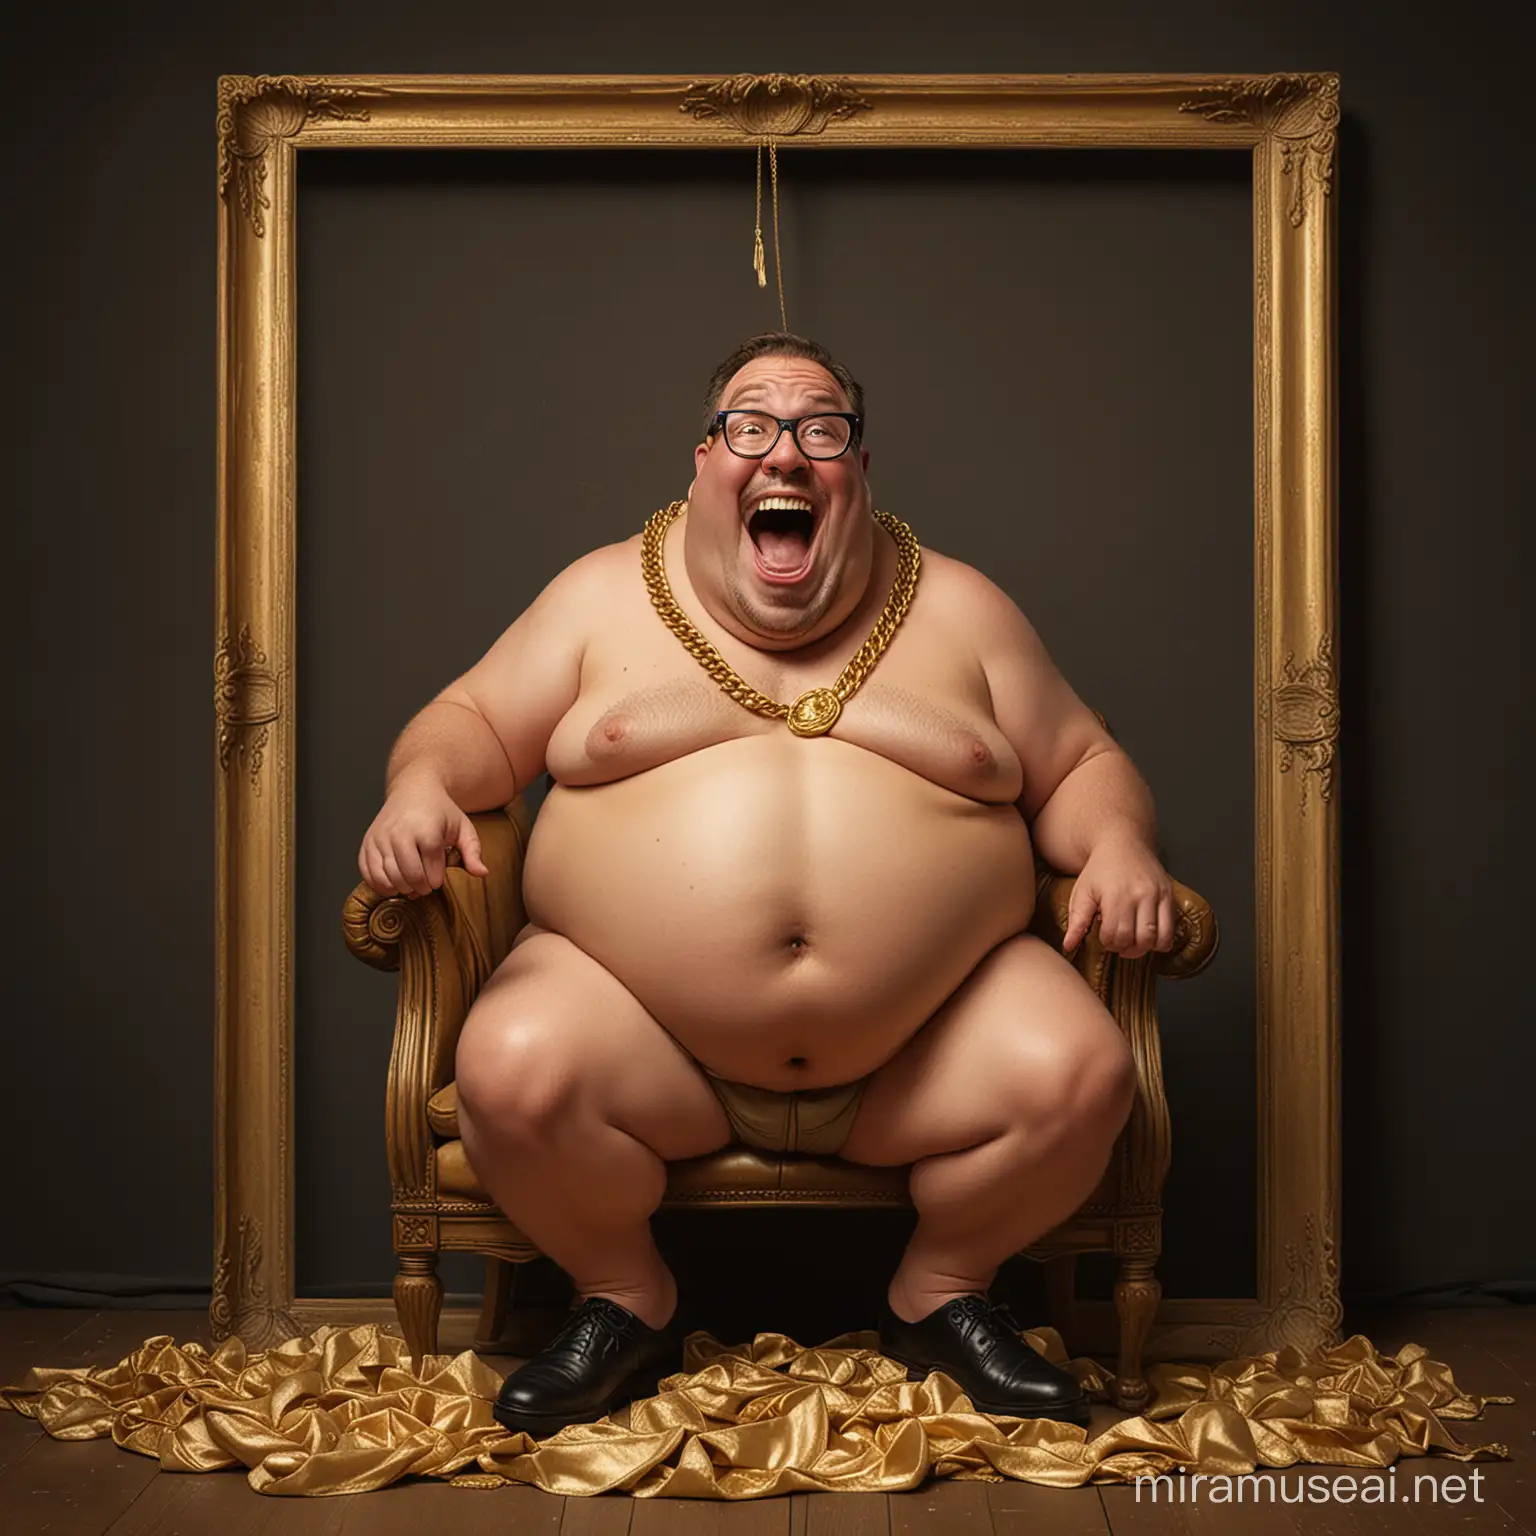 A caricature of a fat man with big stomach, putting on cold chains necklace , and over sized frame eye glasses, laughing, on suite , seating on a chair with gold sack on  the floor, on a black dramatic background 